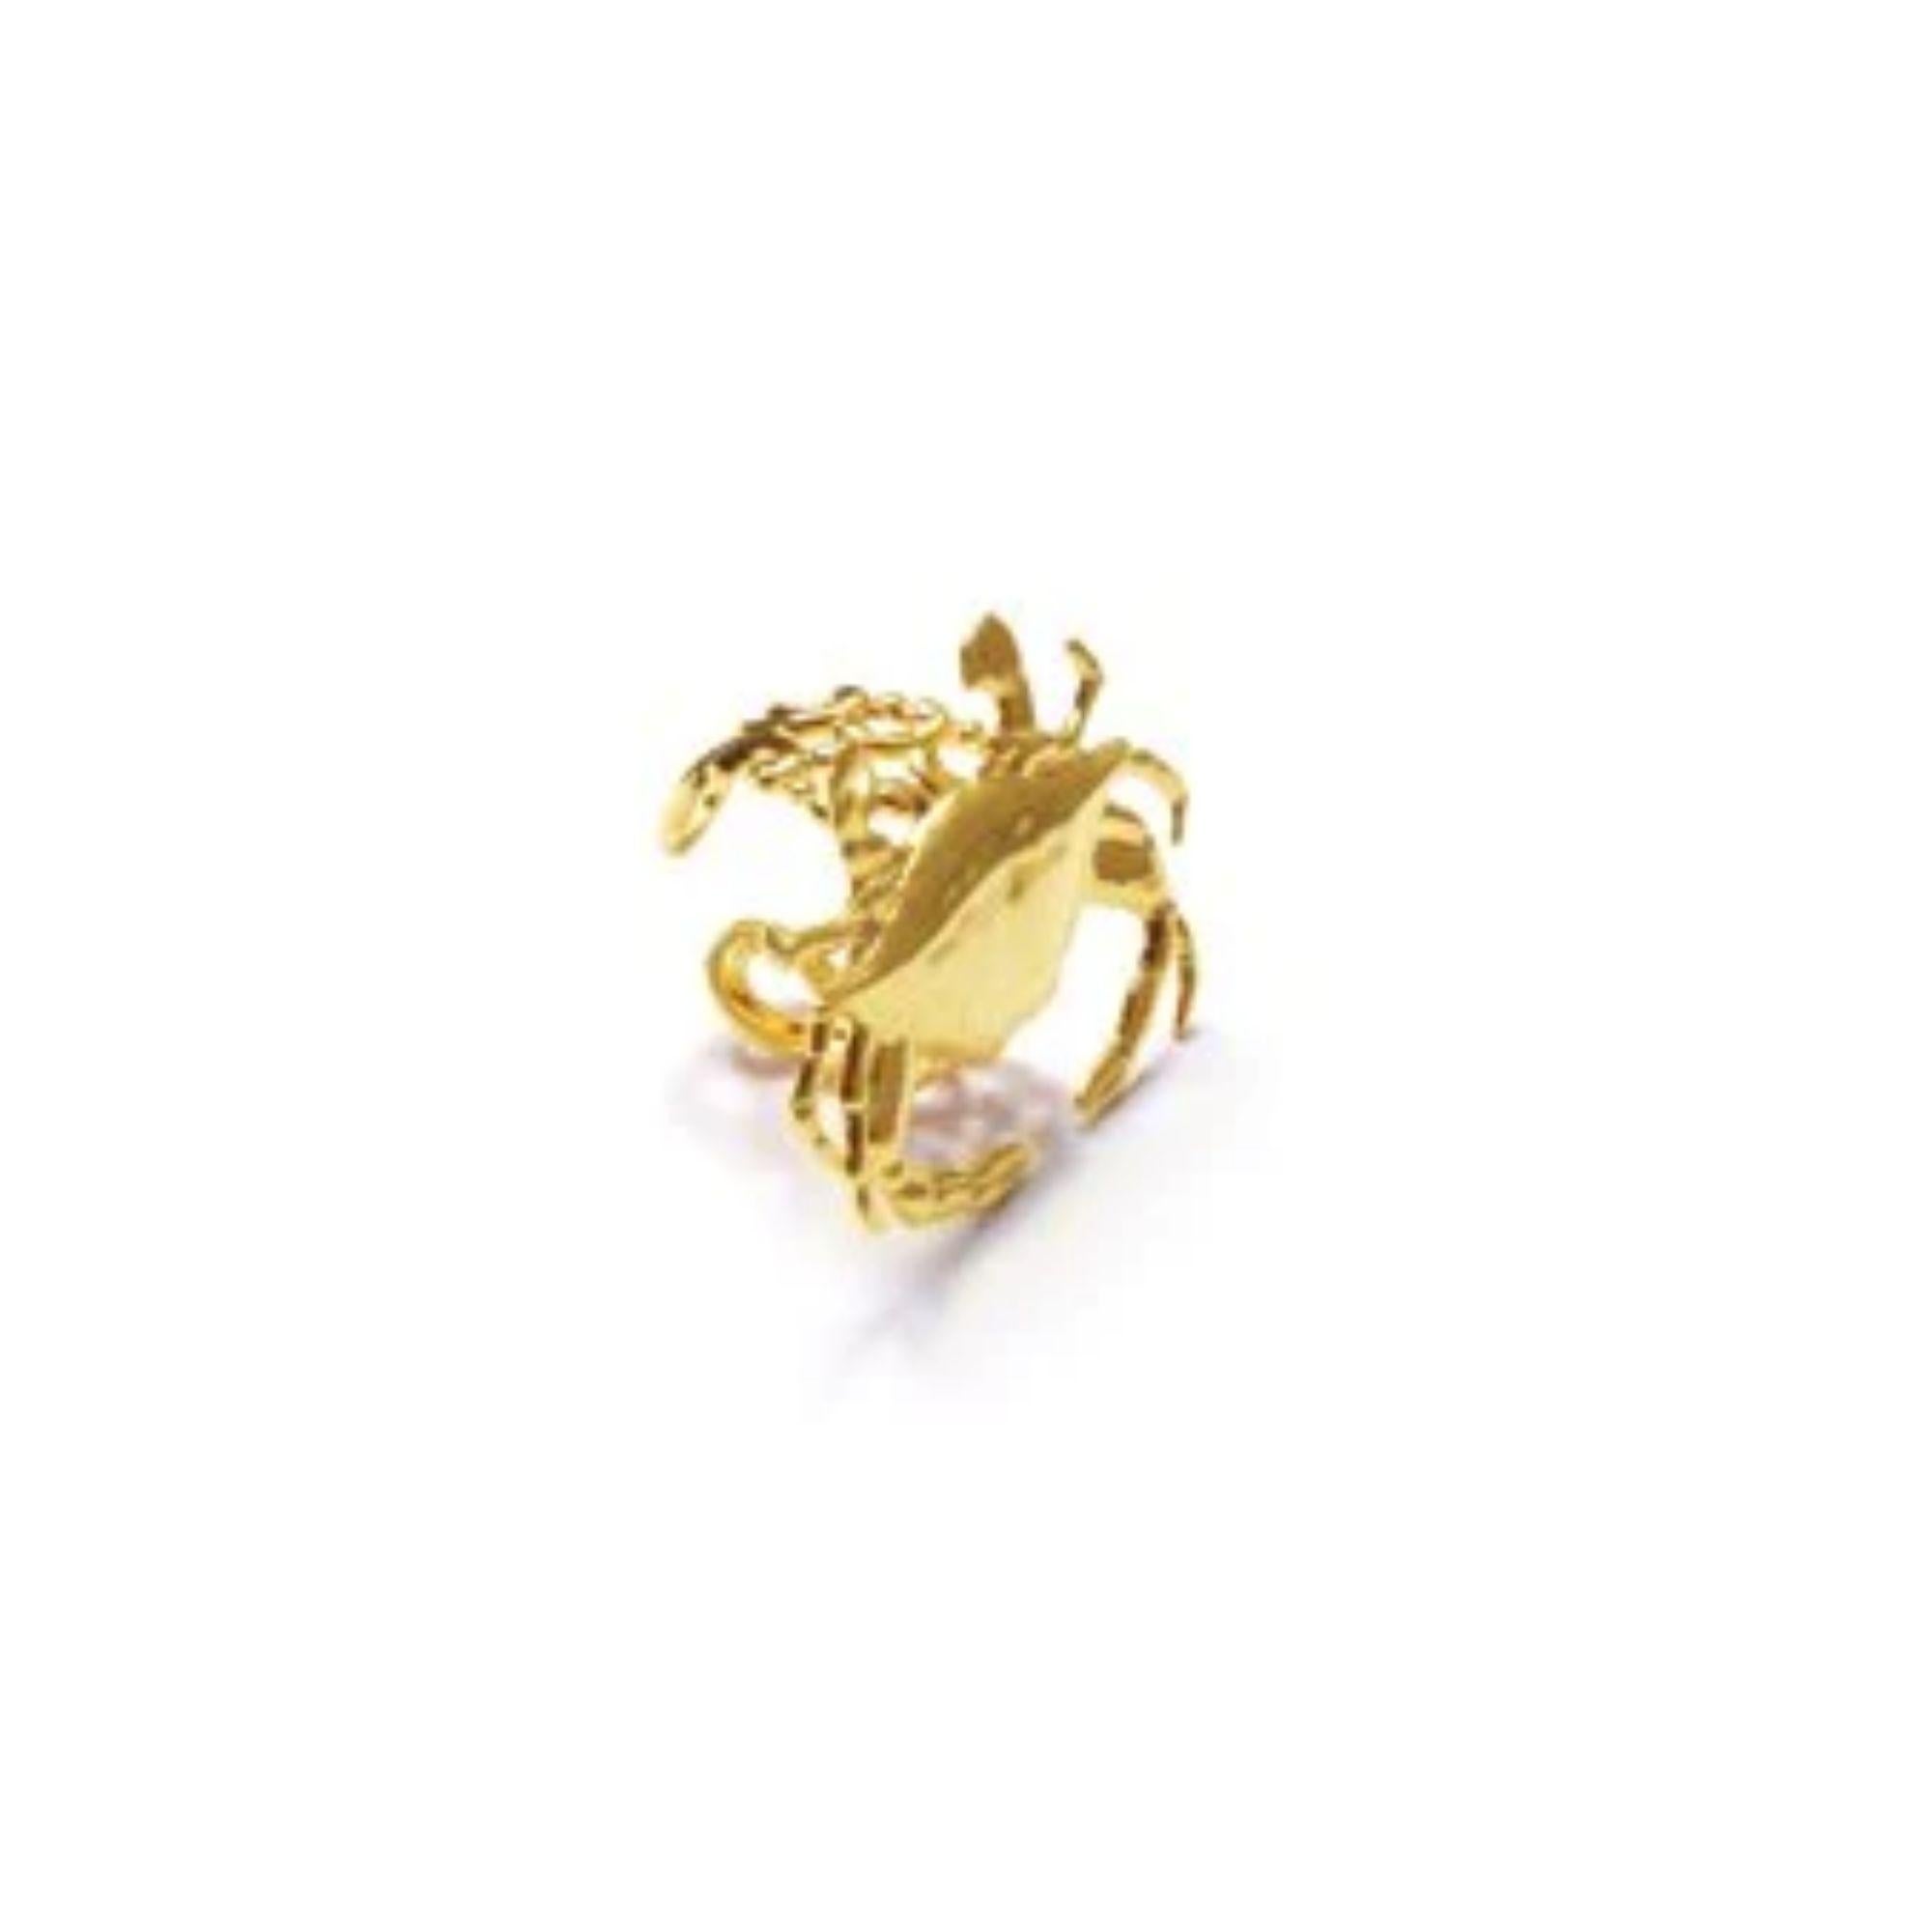 A fun, surreal-art Sebastian crab ring is the perfect conversation piece! Also a great zodiac Cancer ring! Ring is adjustable with a baroque design and can be finished in 24k yellow or rose gold. Made in America. Plated on Brass.

Additional